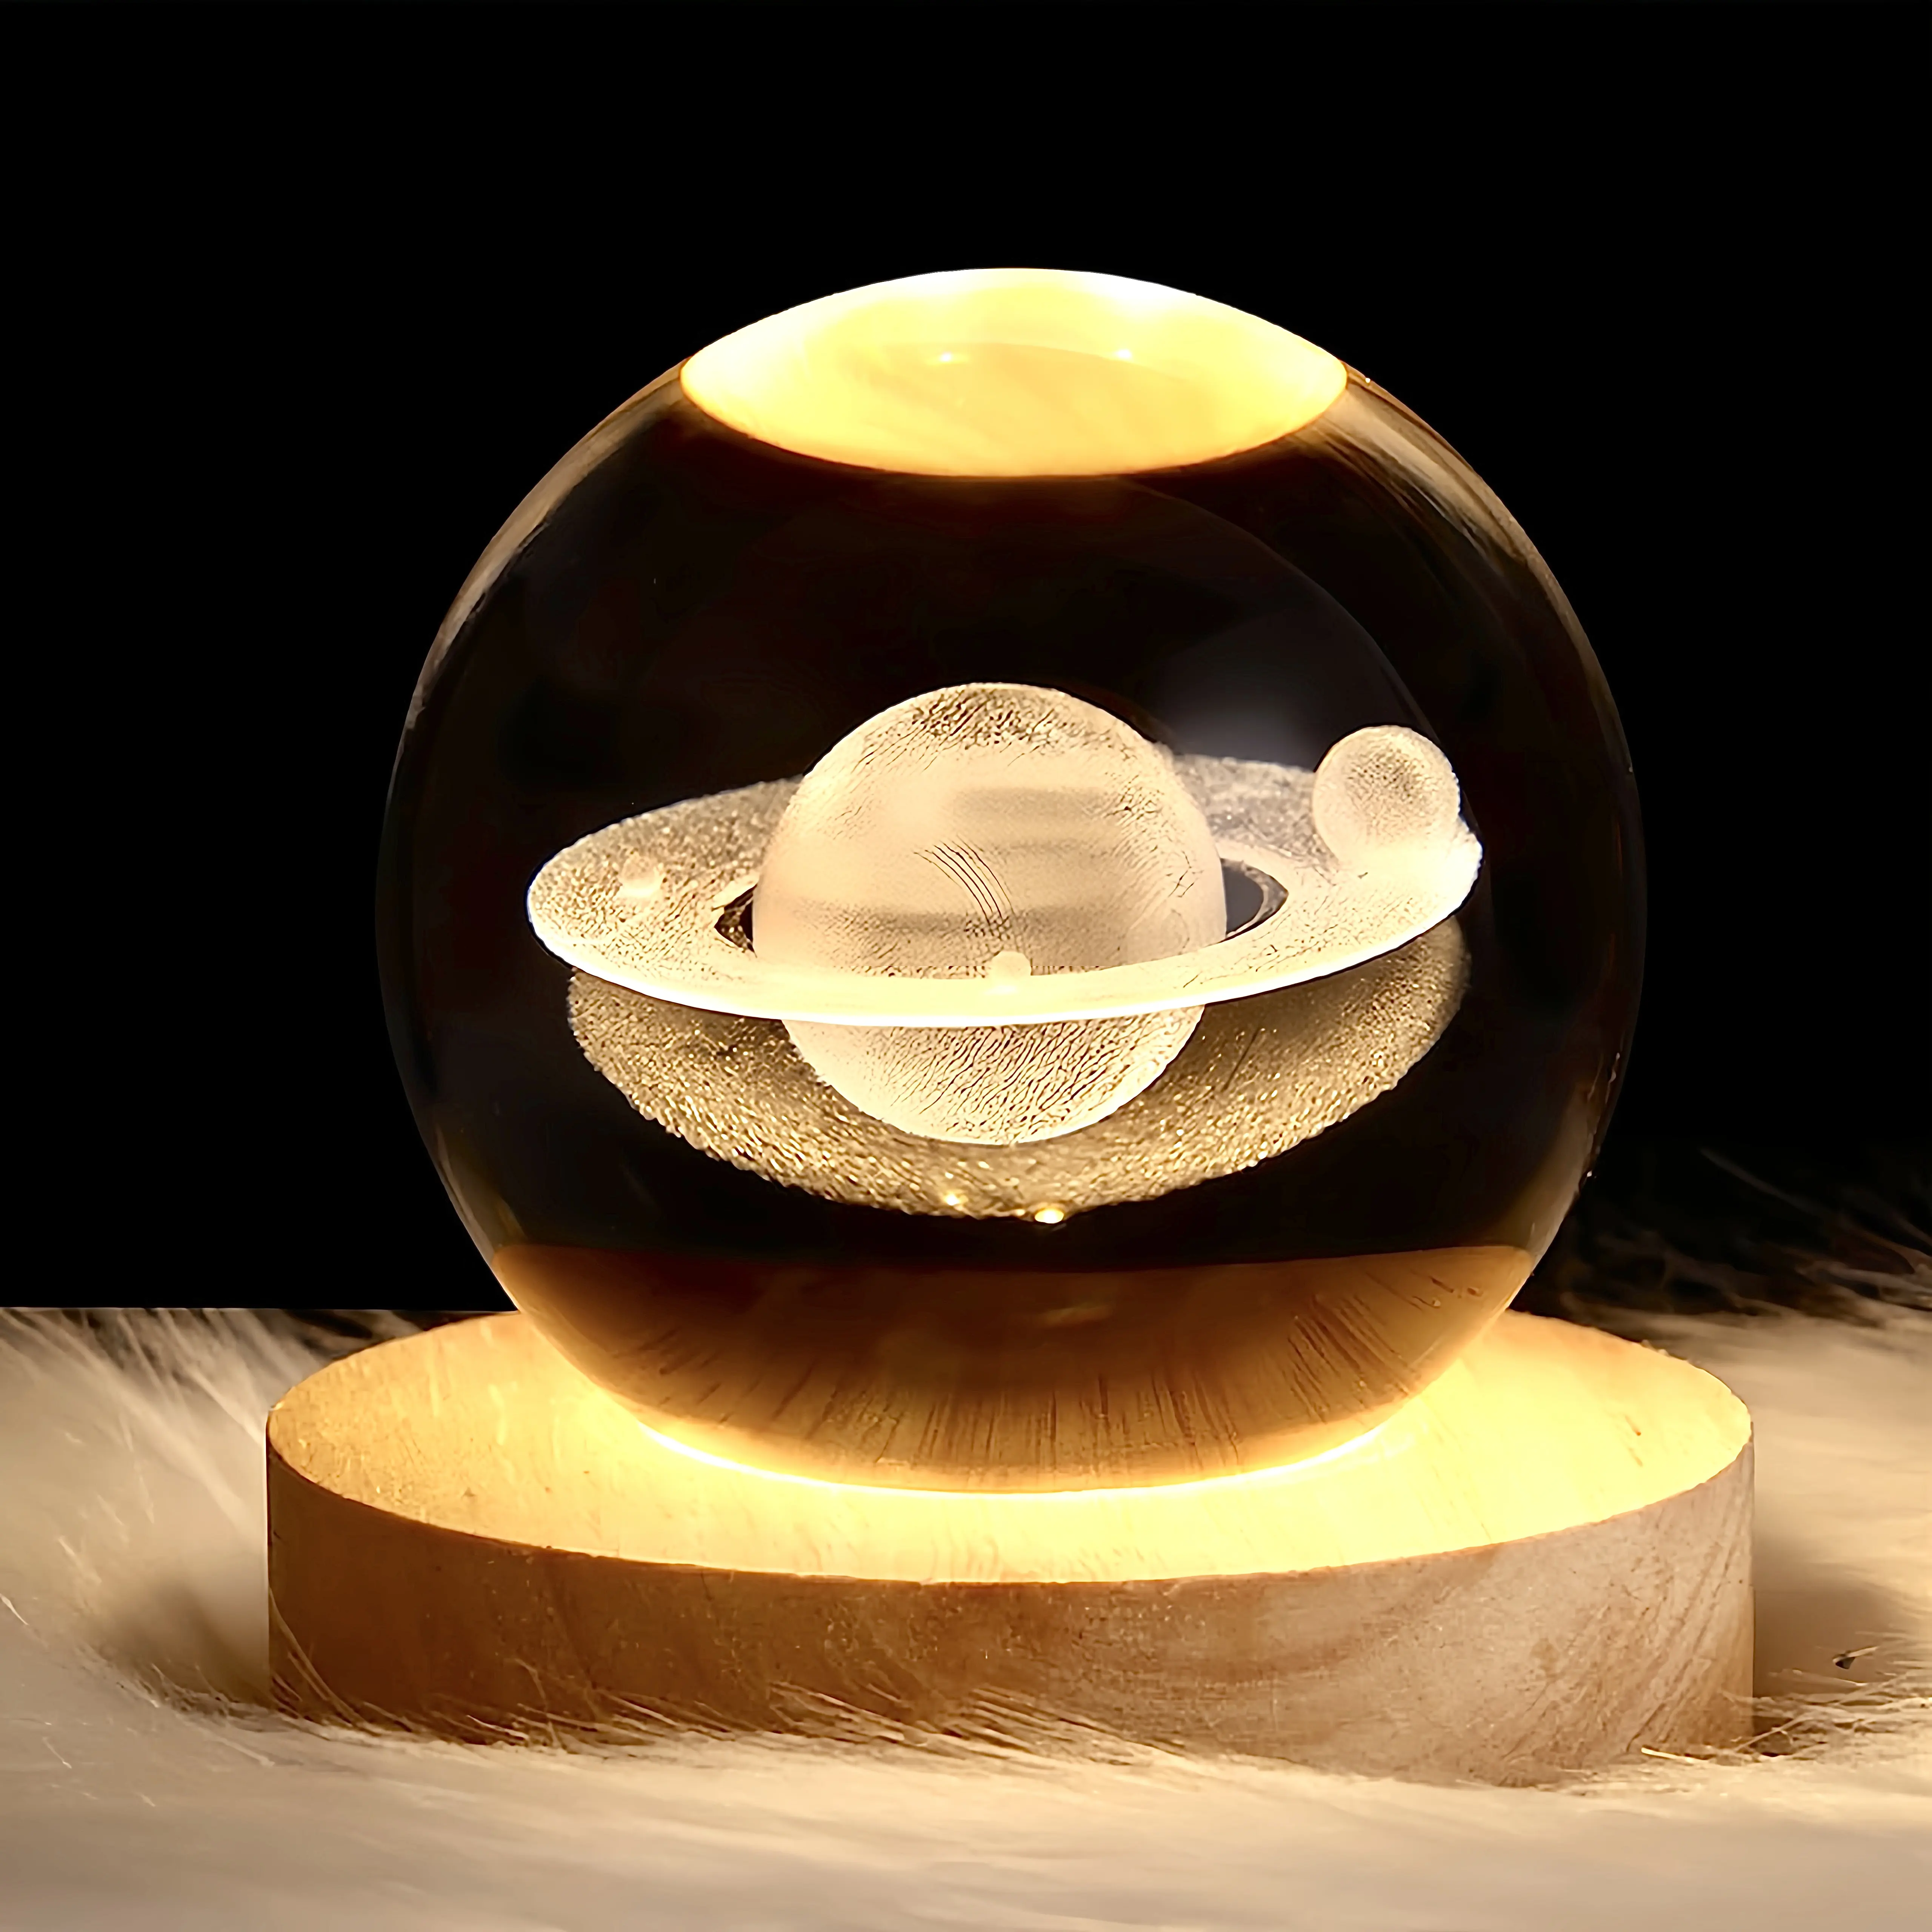 Crystal Ball 3D Caving Night Light Saturn Lamp Planet Lamp Crystal LED Galaxy Nightlight with Wood Base for Bedroom Decor